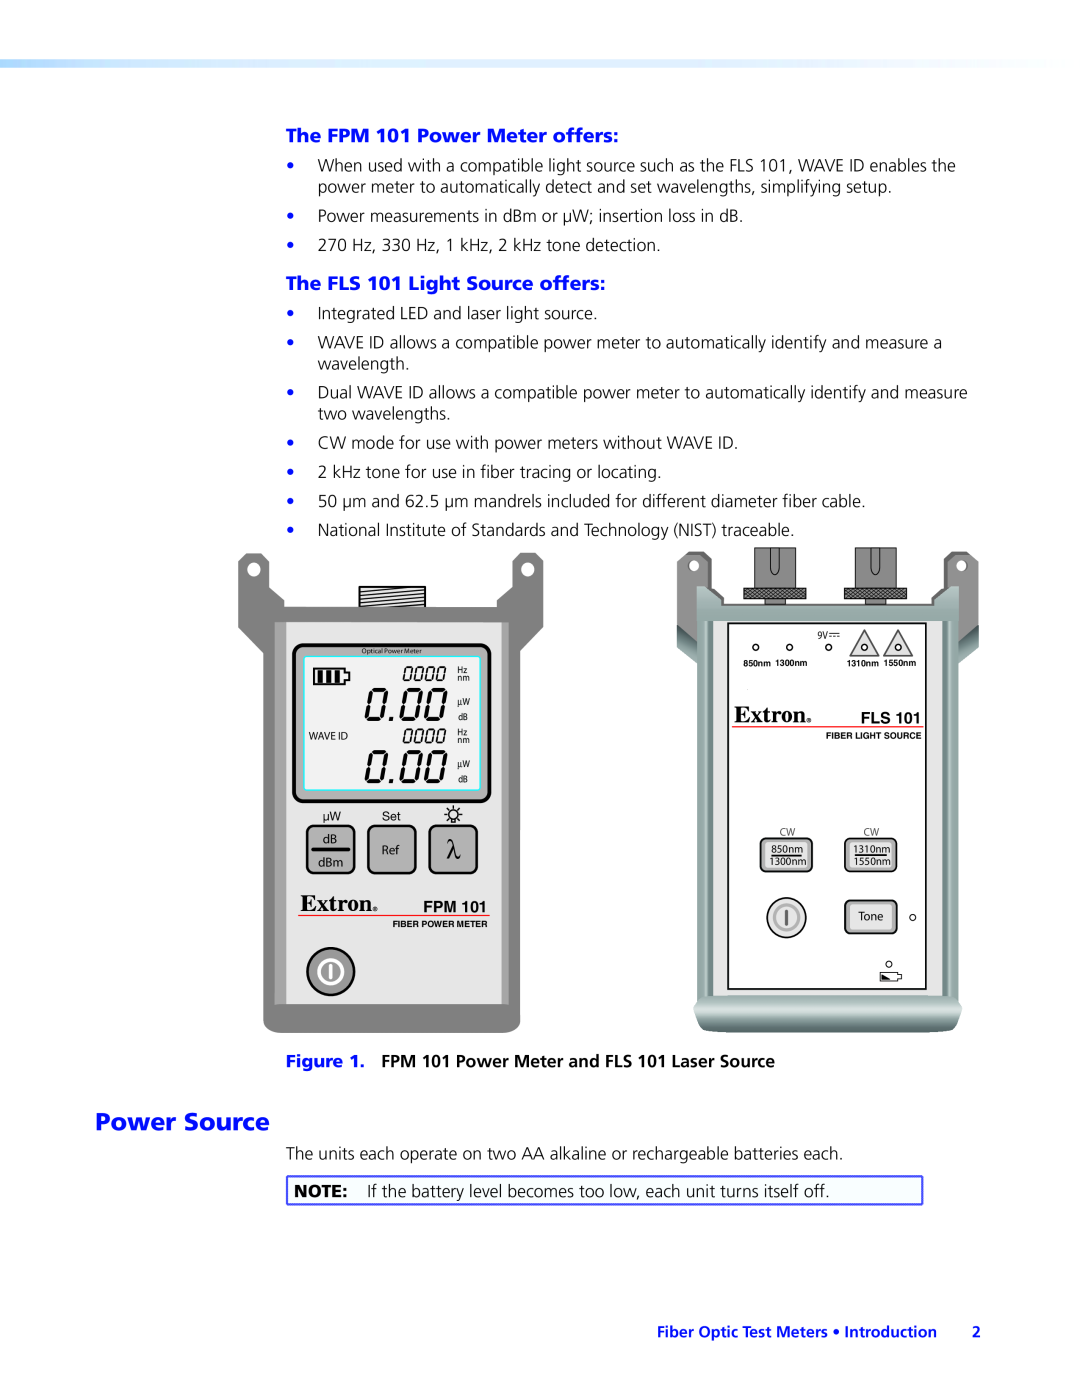 Extron electronic manual Power Source, 0000, The FPM 101 Power Meter offers, The FLS 101 Light Source offers, 0.00 